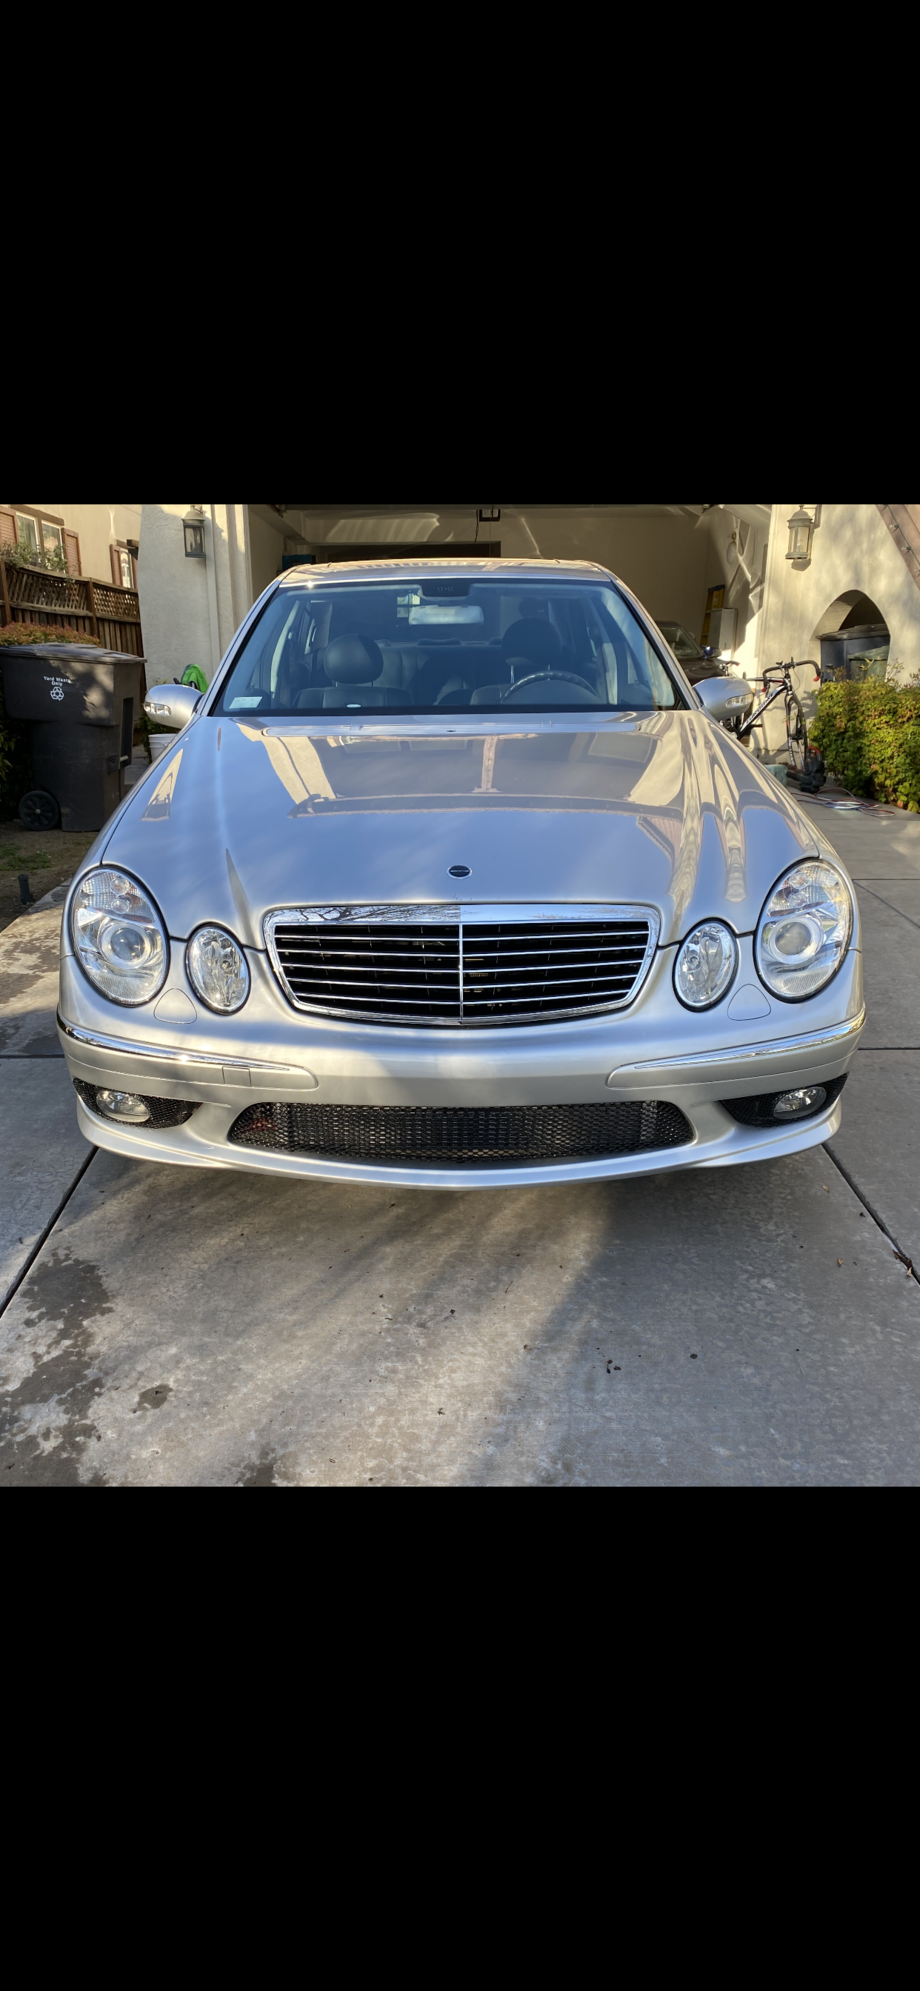 2004 Mercedes-Benz E55 AMG - 1 Owner 2004 E55 23K Miles - Used - VIN wdbuf76jx4a425023 - 23,916 Miles - 8 cyl - 2WD - Automatic - Sedan - Silver - Tracy, CA 95391, United States